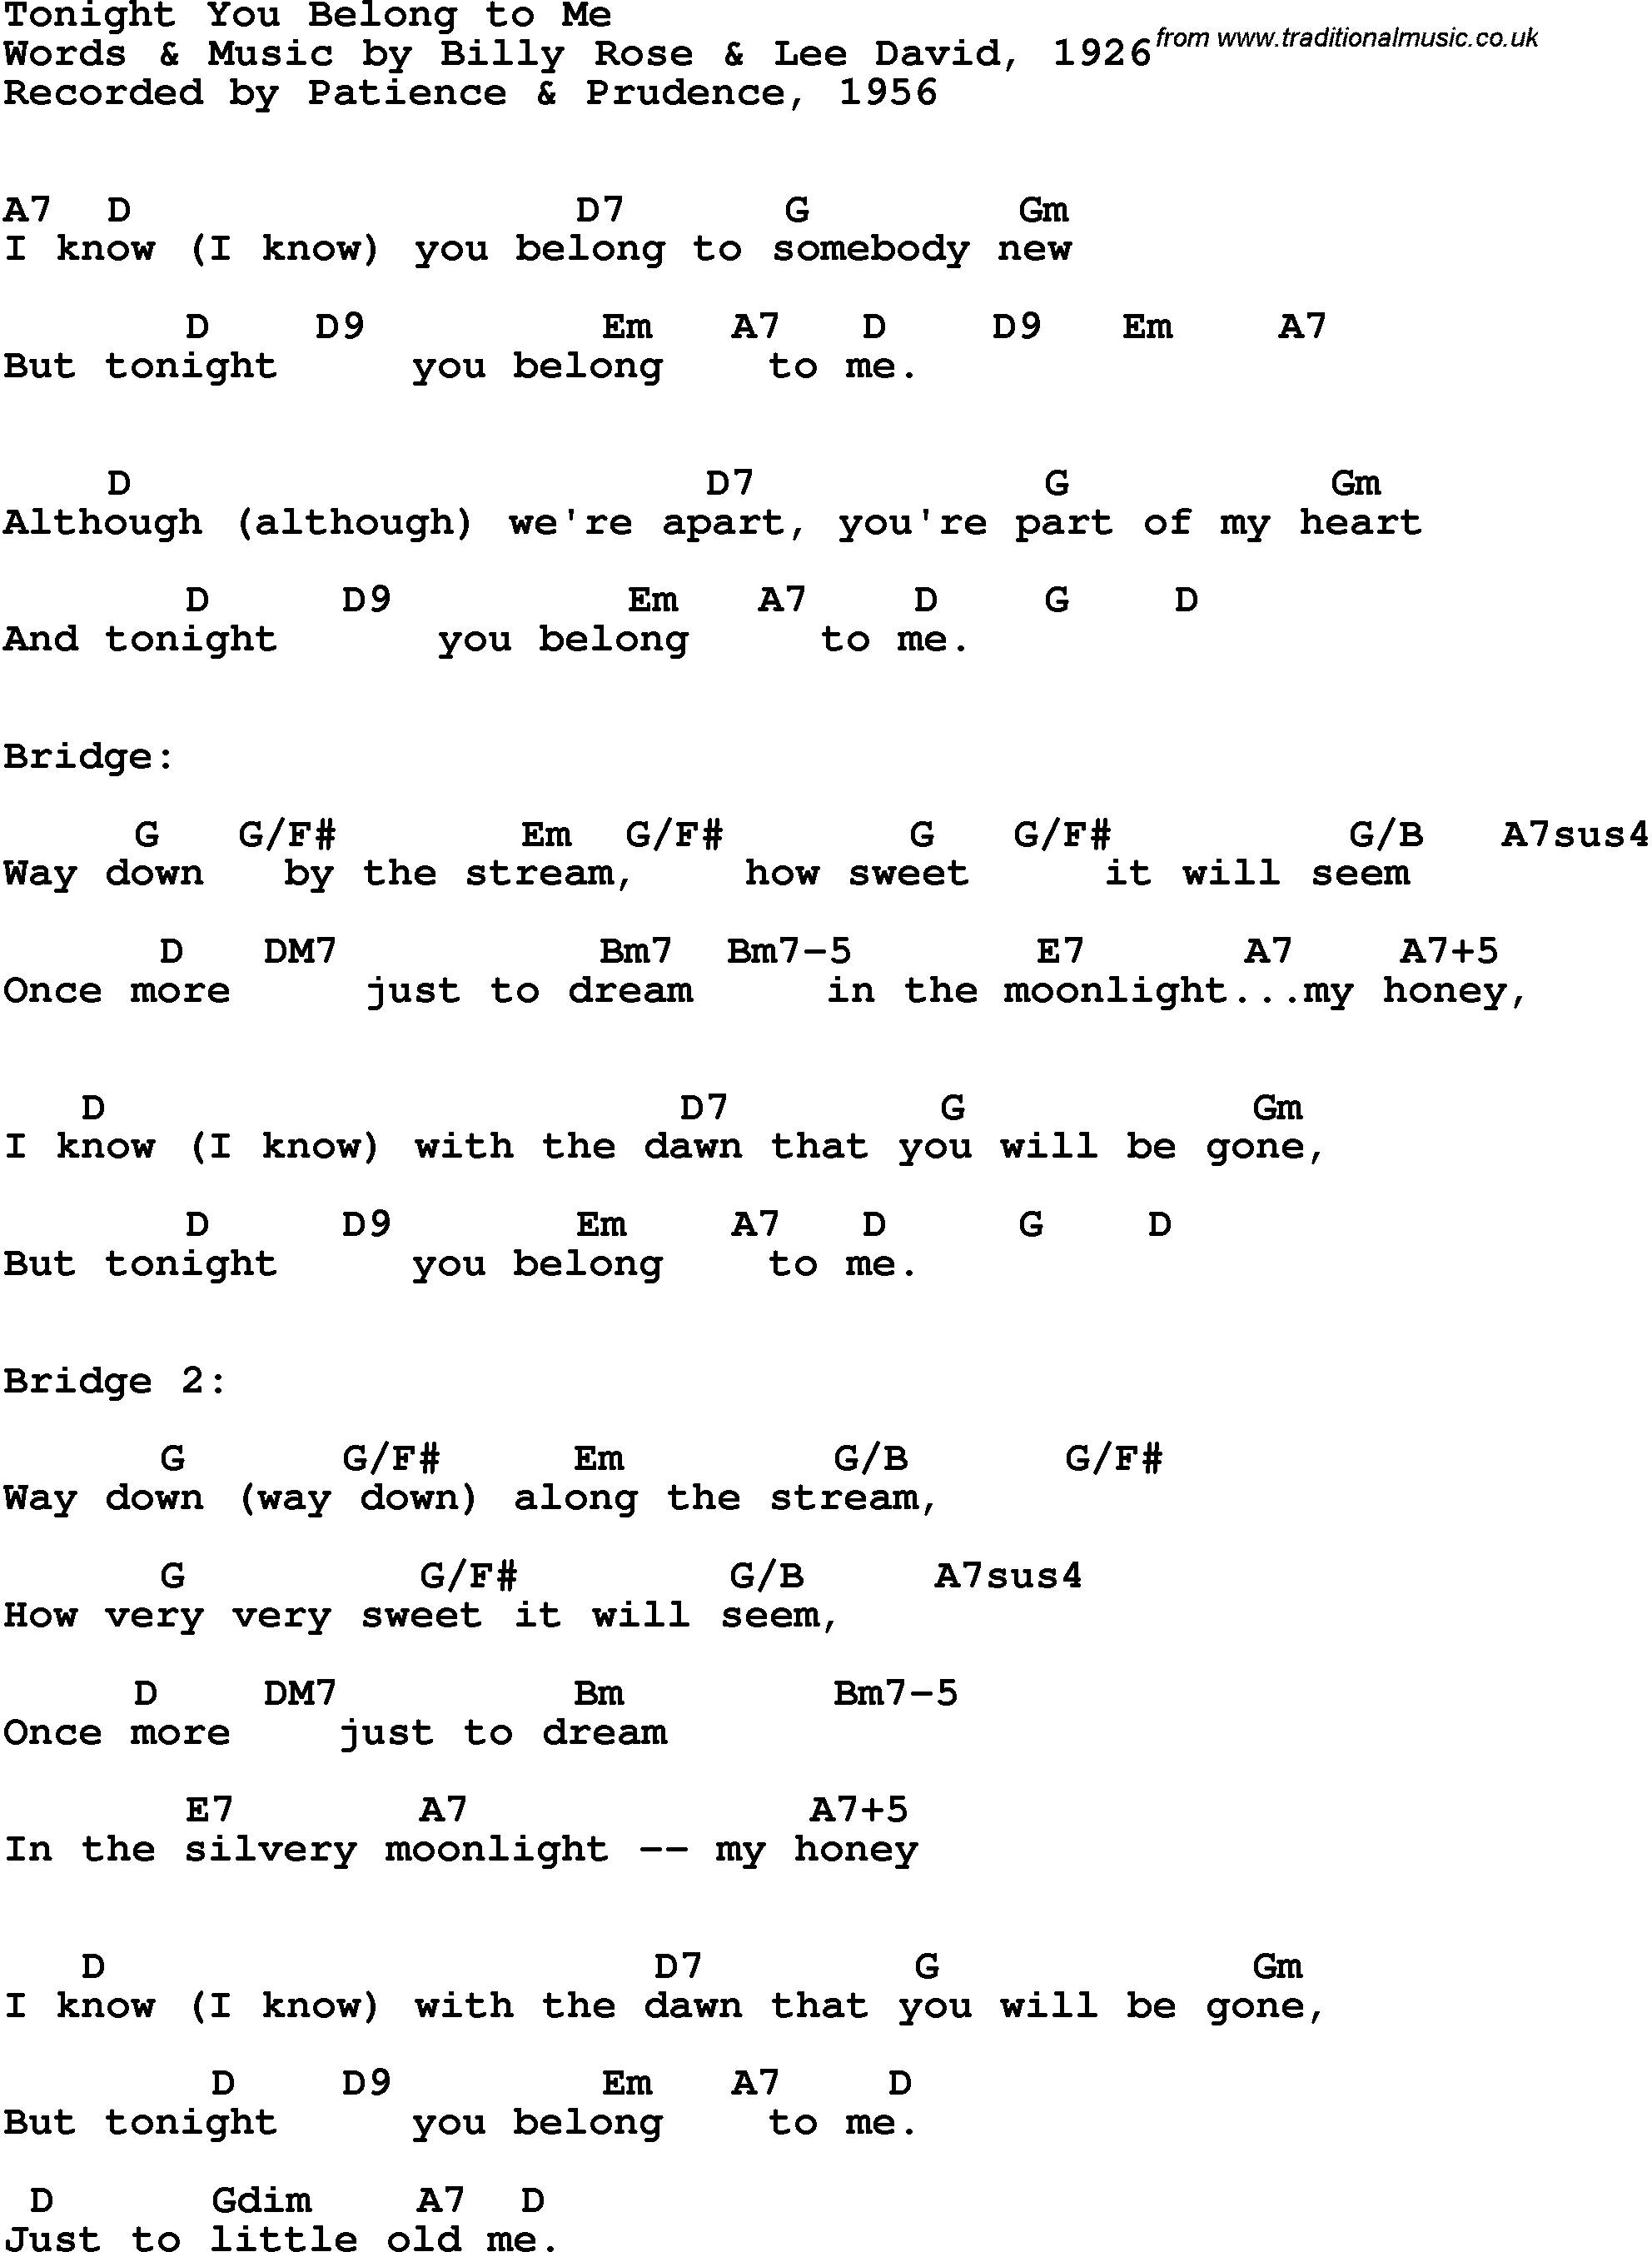 Song Lyrics with guitar chords for Tonight You Belong To Me - Patience & Prudence, 1956